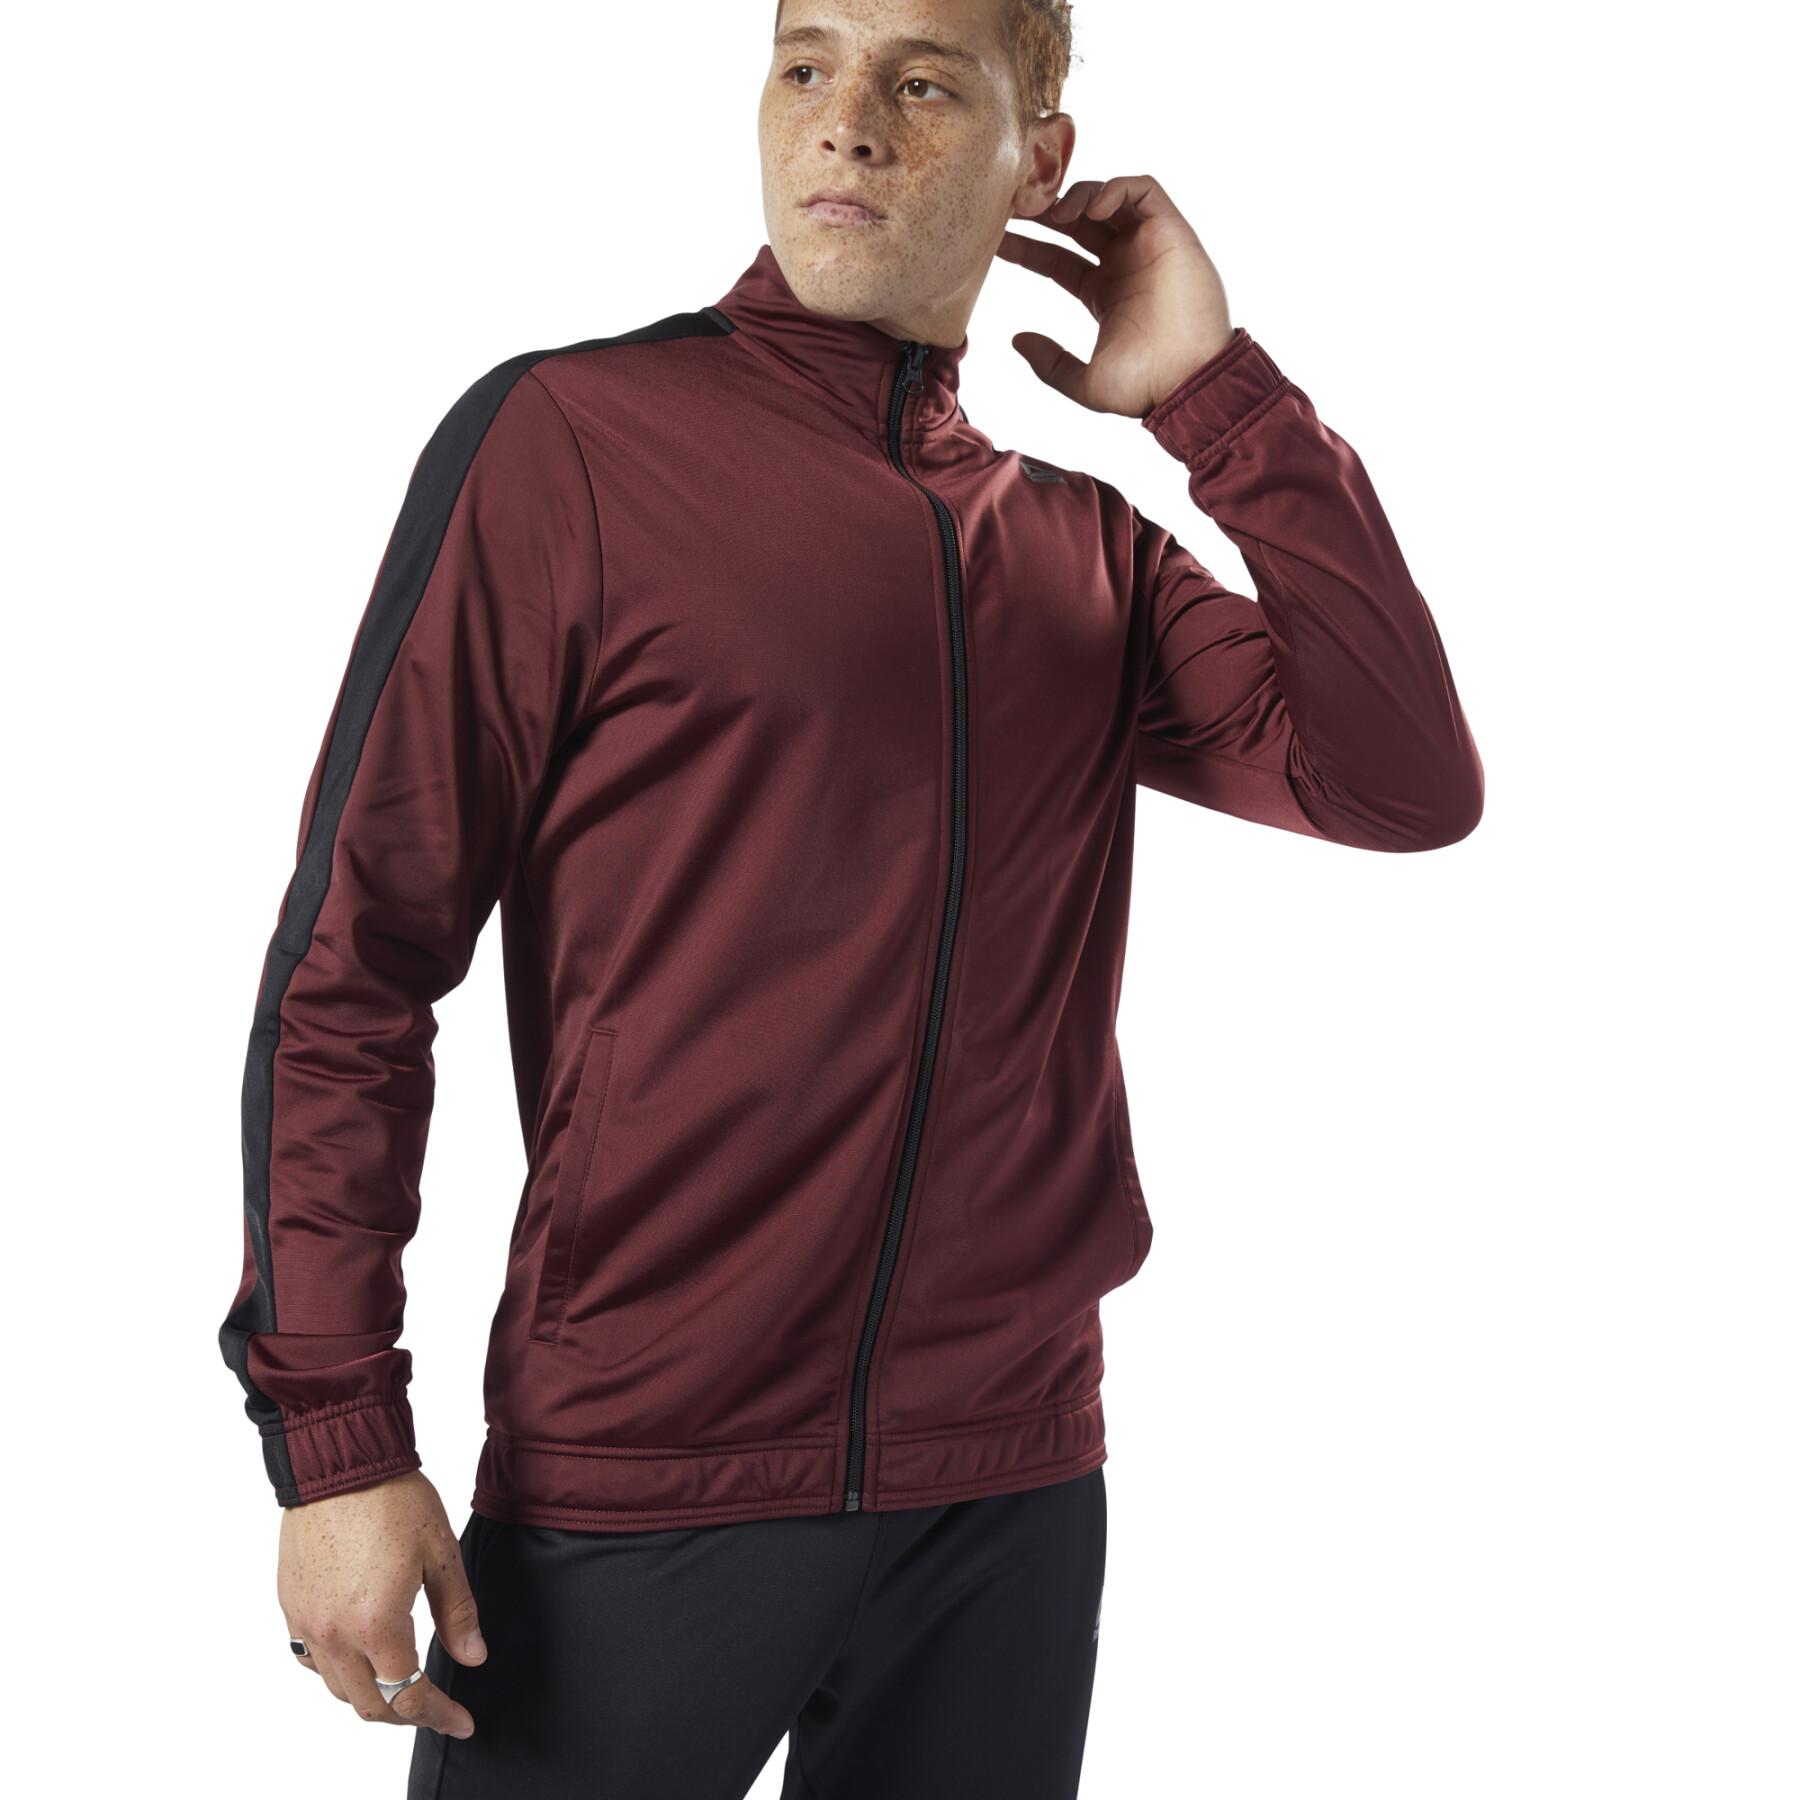 Tracksuit Reebok - Tracksuits - Men's Clothing - Fitness